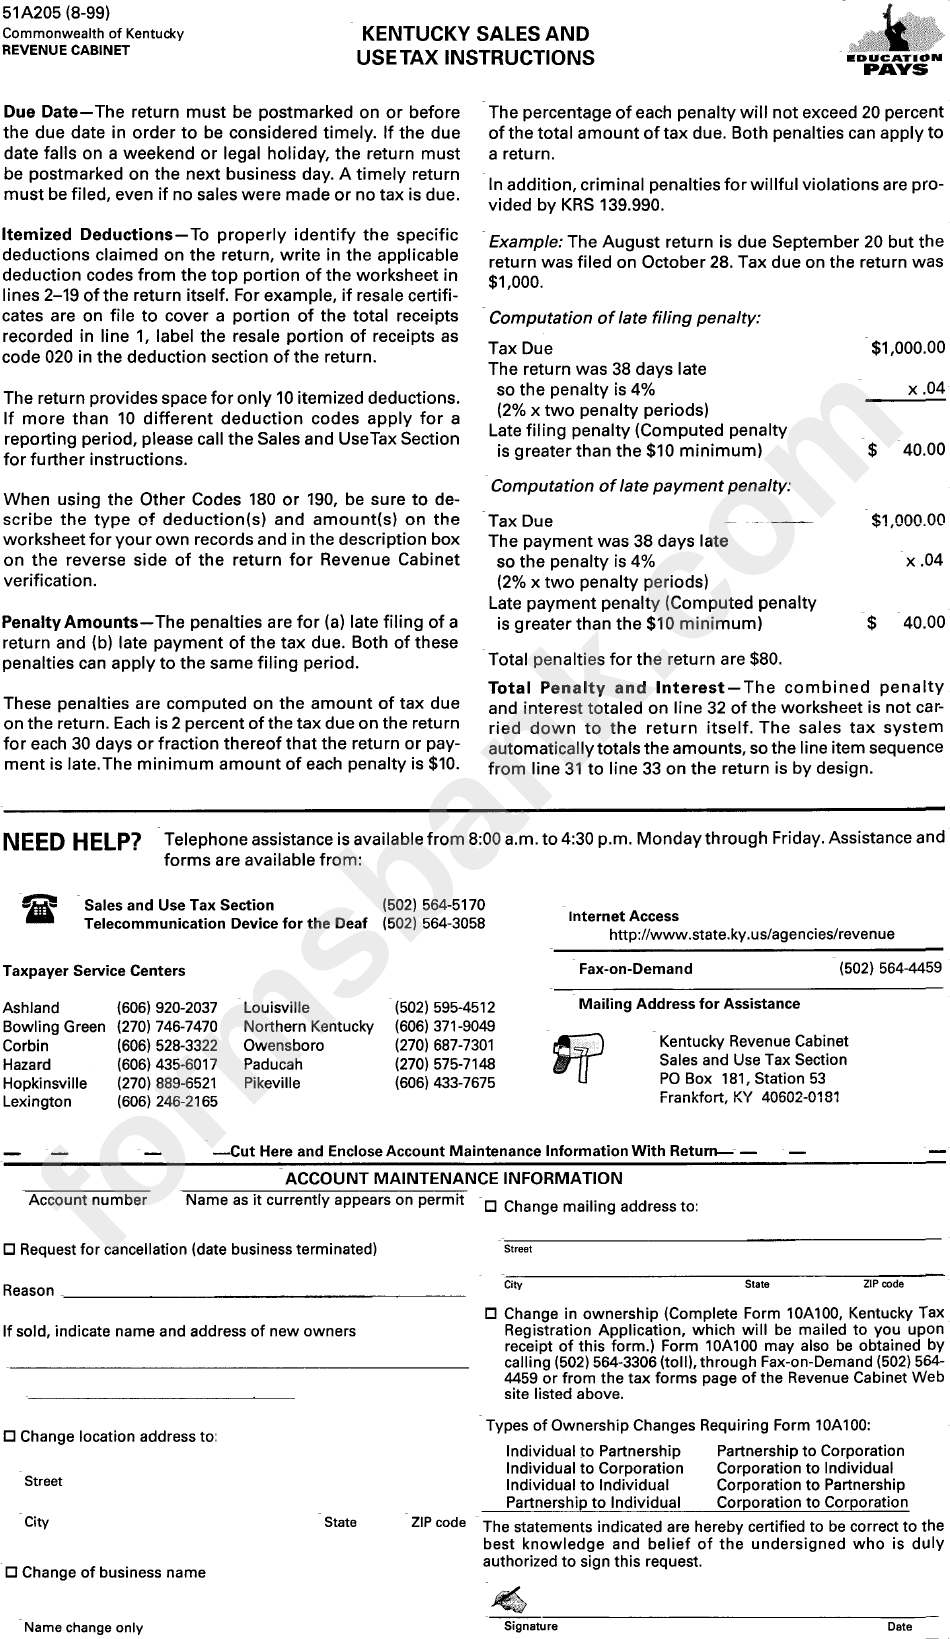 Form 51a205 - Kentucky Sales And Use Tax Instructions